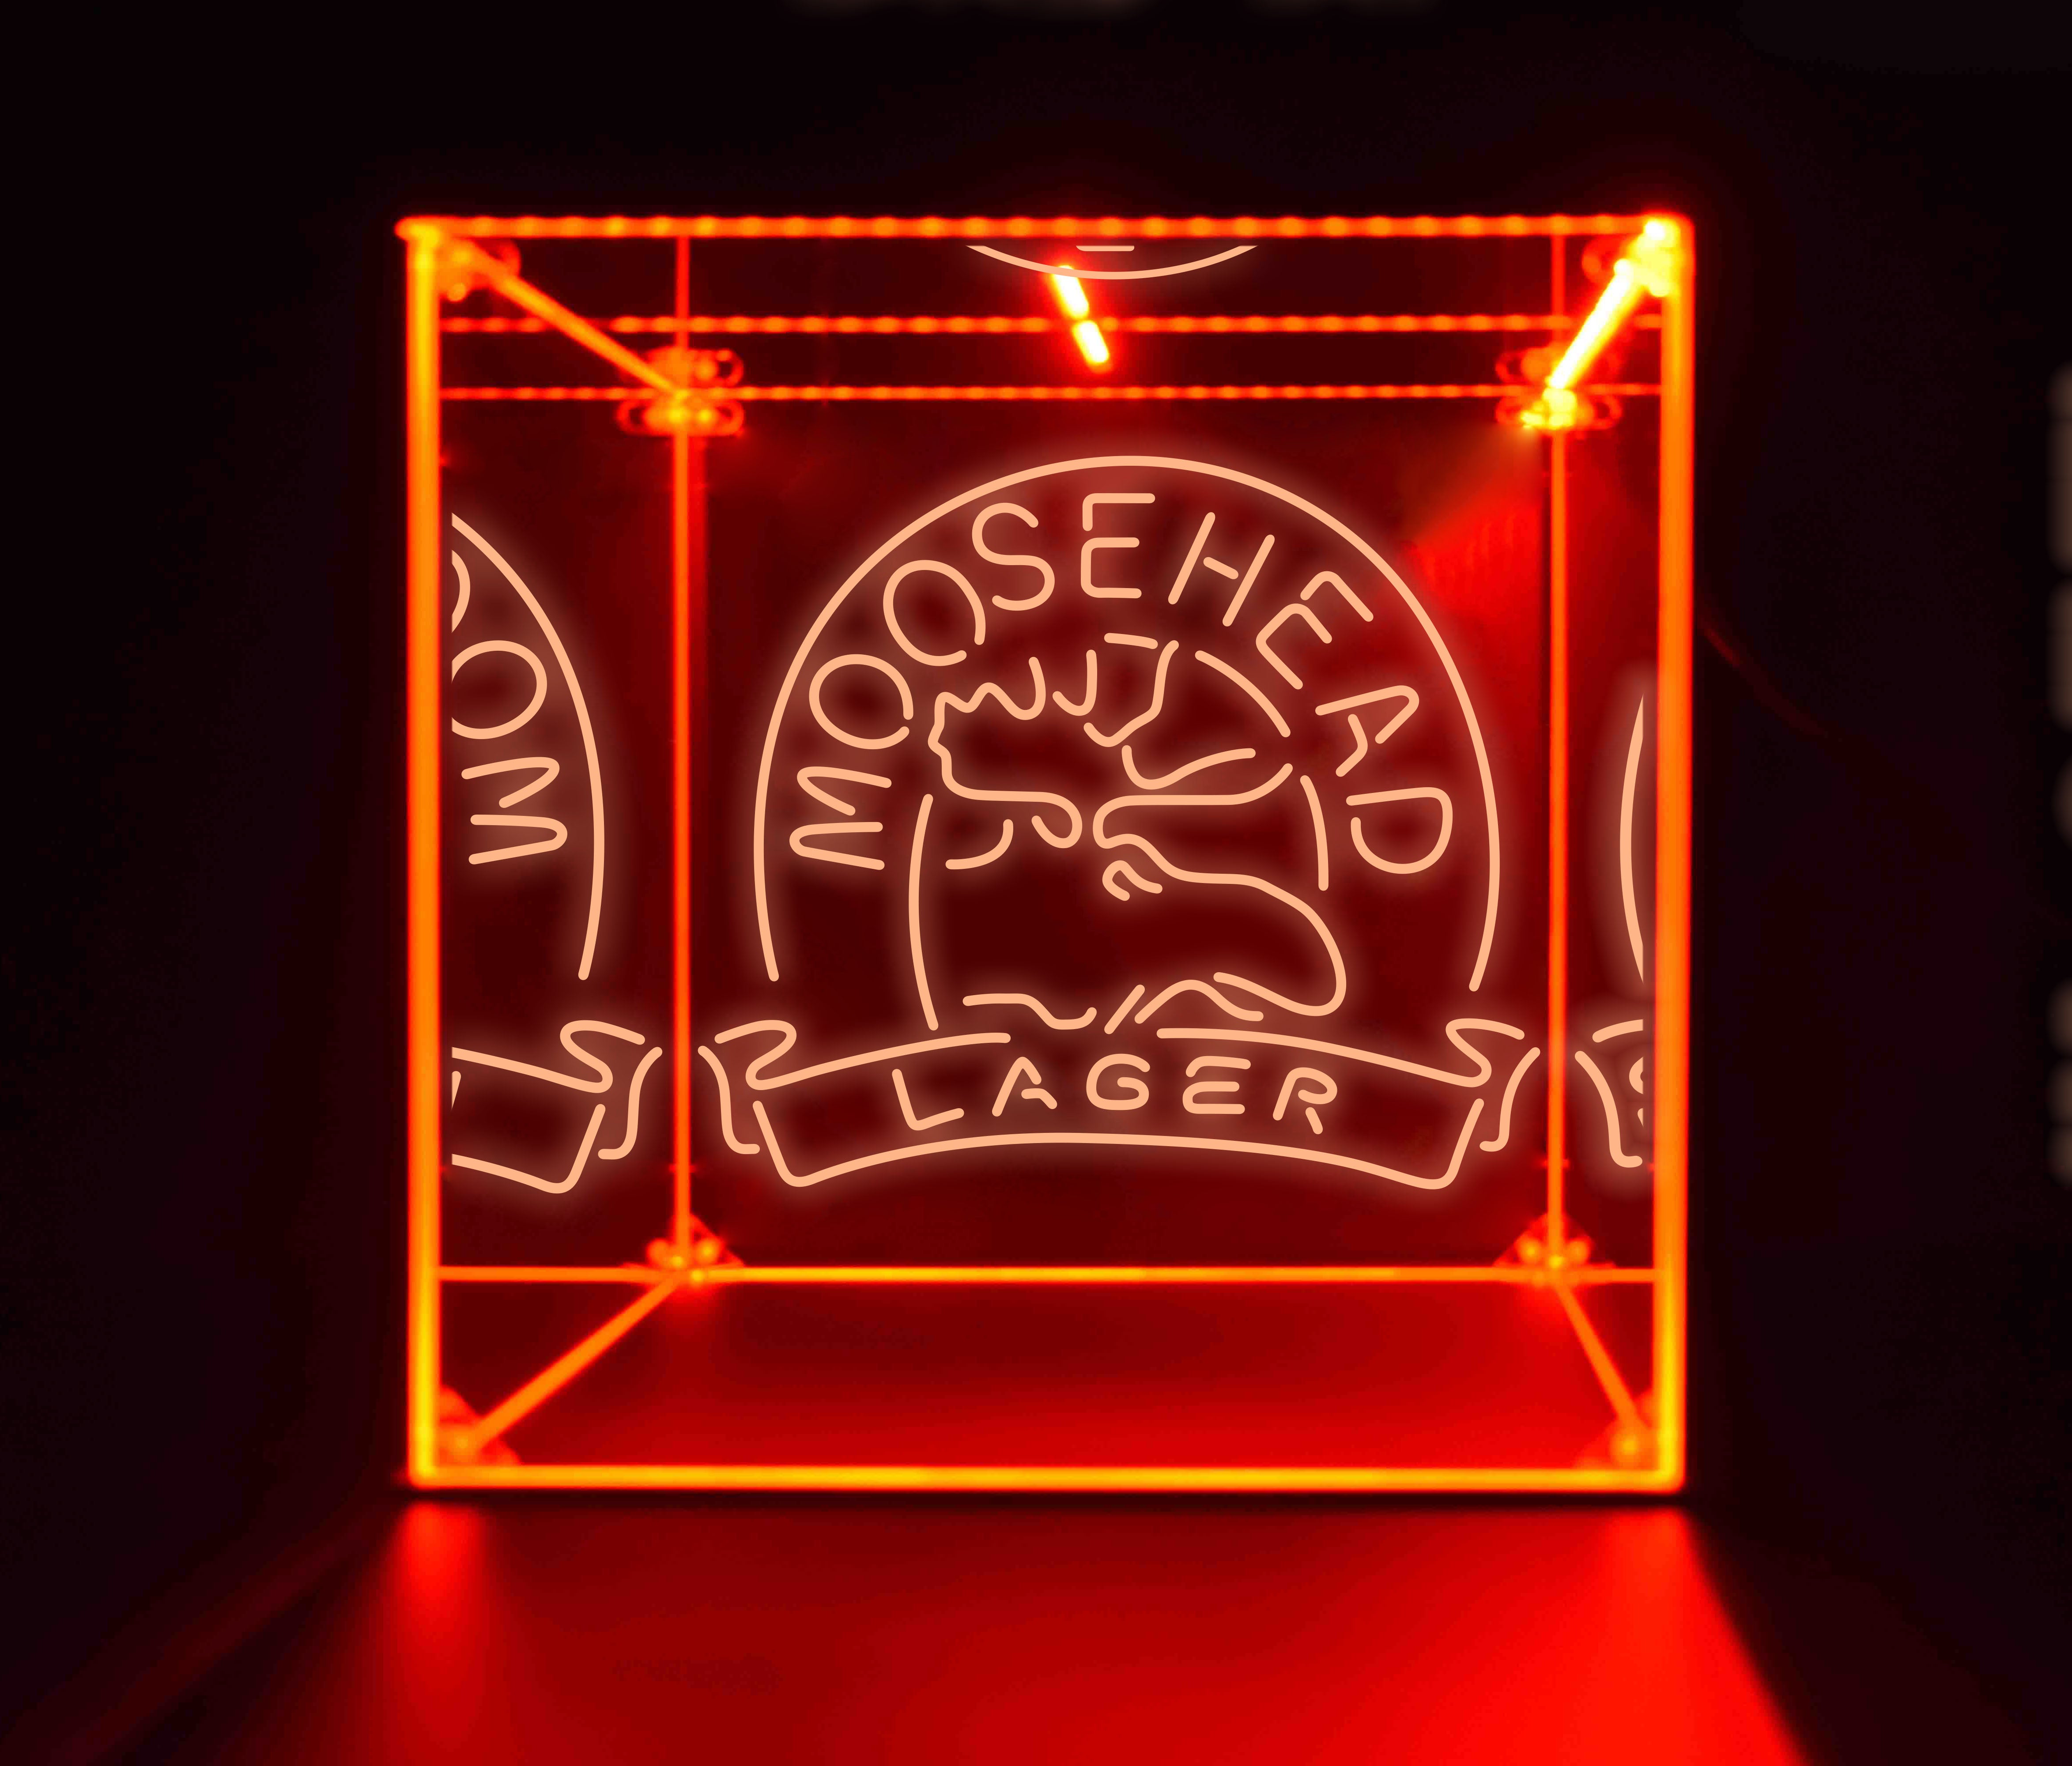 Wine, Champagne, Liquor, Beverage Bottle LED Display Case, Moosehead Collection